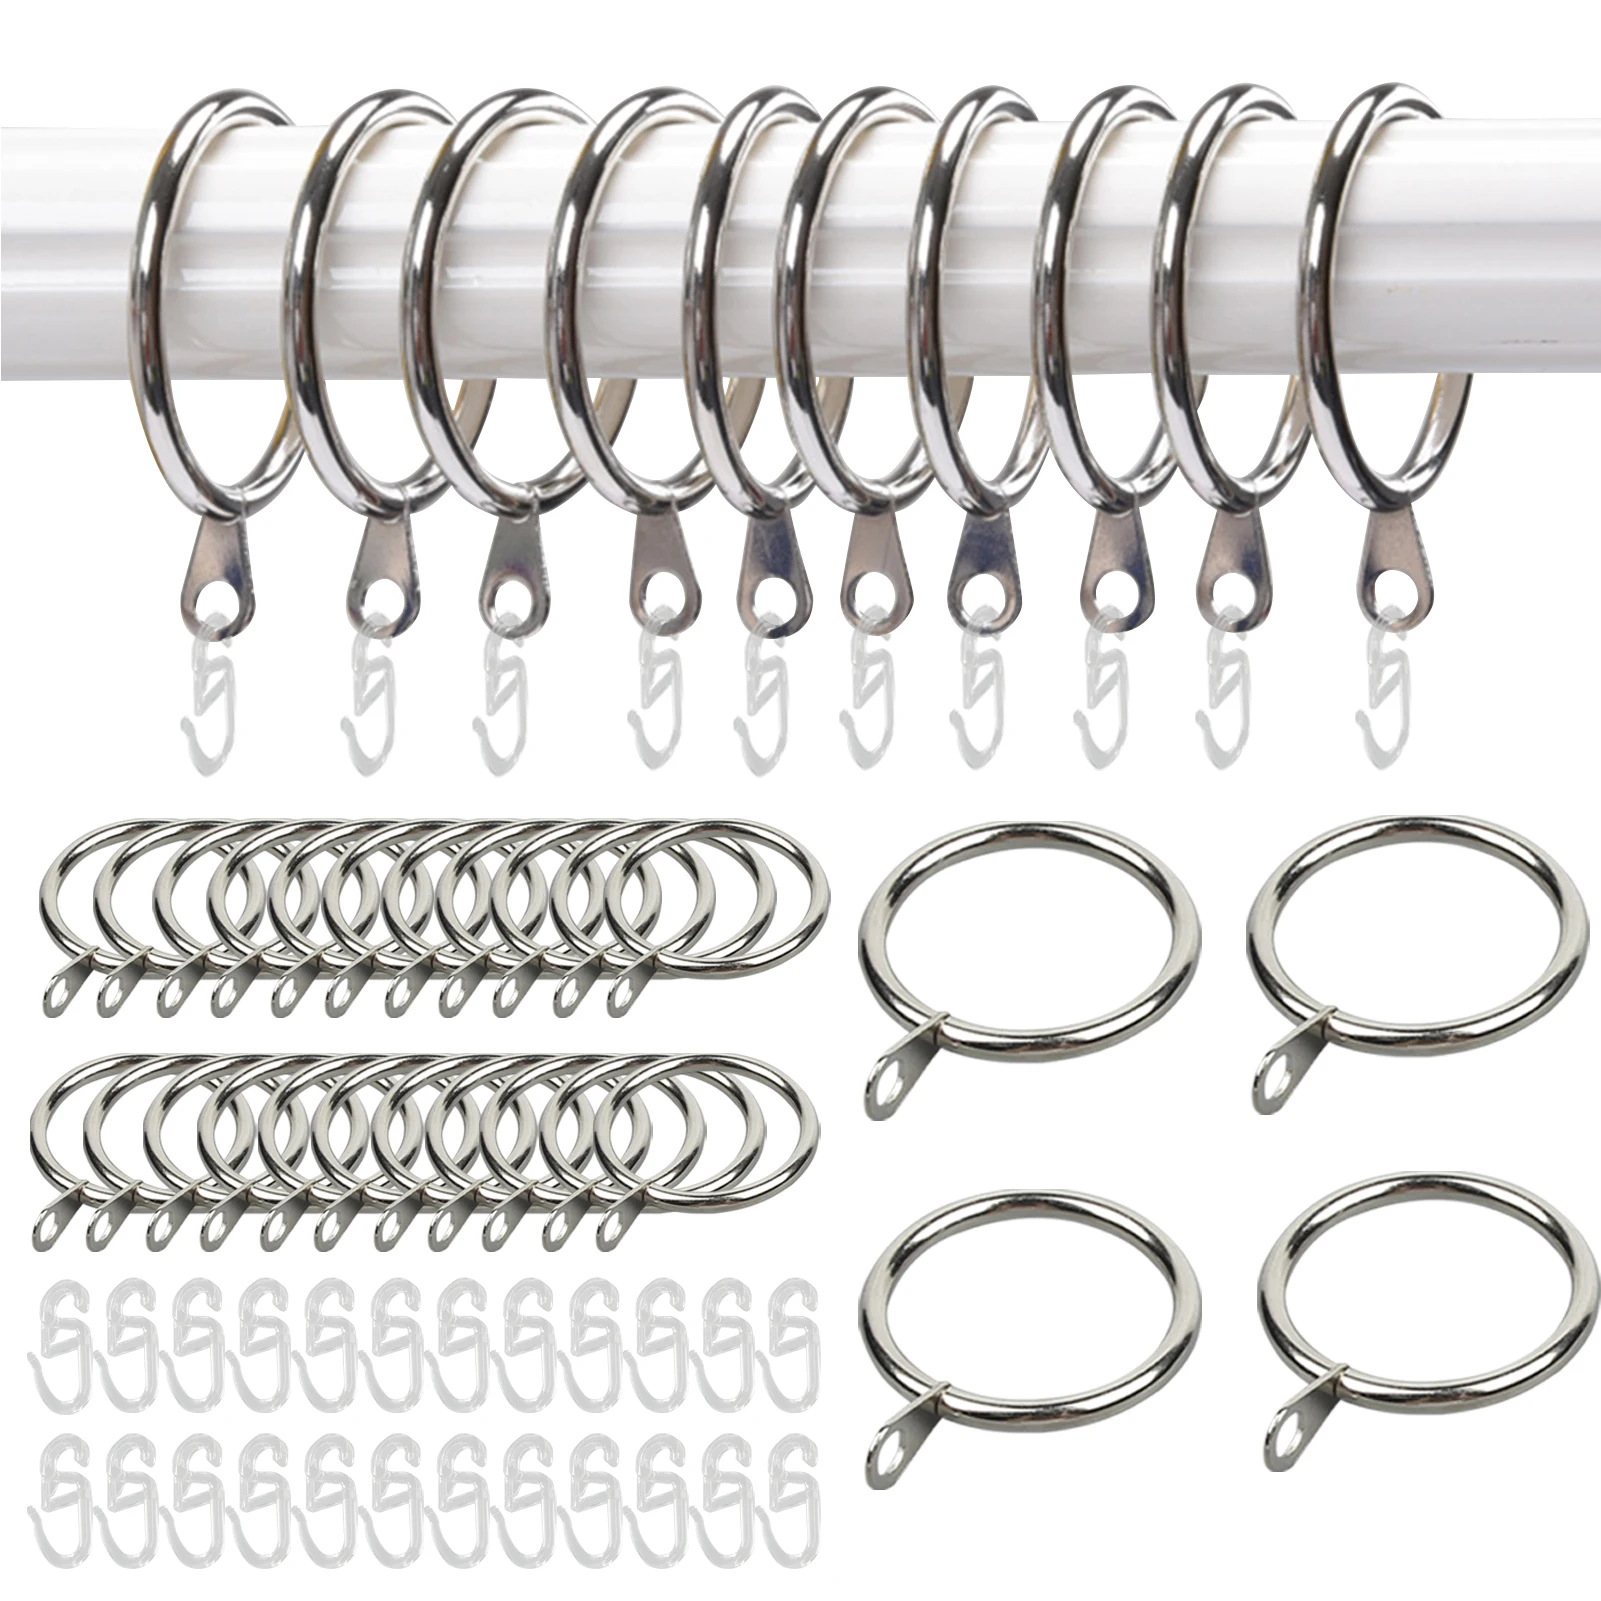 

22pcs Bedroom Low Noise Easy Install Heavy Duty 30mm Inner Diameter Metal Curtain Ring Convenient With Eyelet Hooks Window Rods